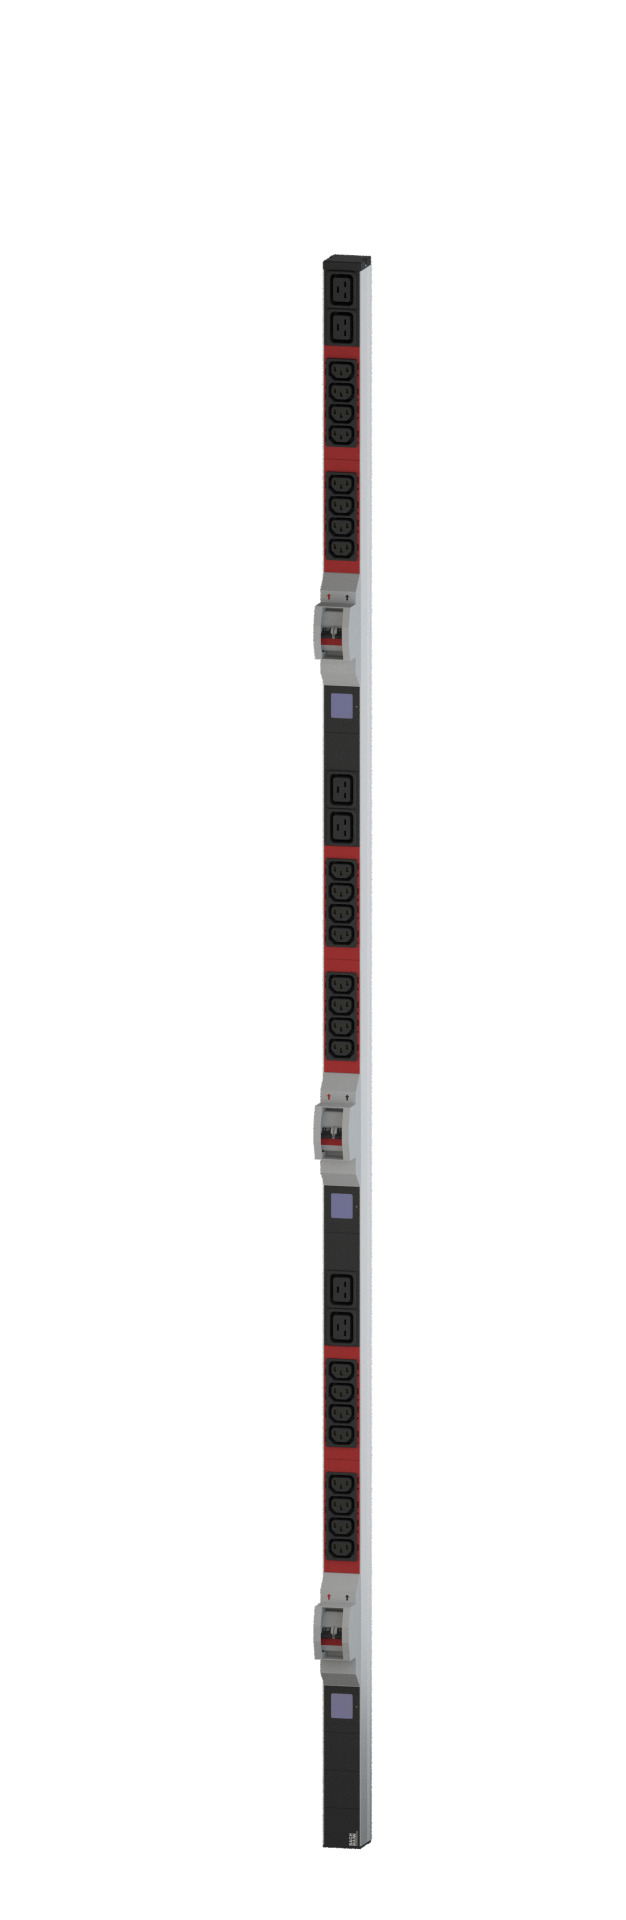 PDU Vertical BN500 24xC13 6xC19 400V 32A with Power Measuring (Display)